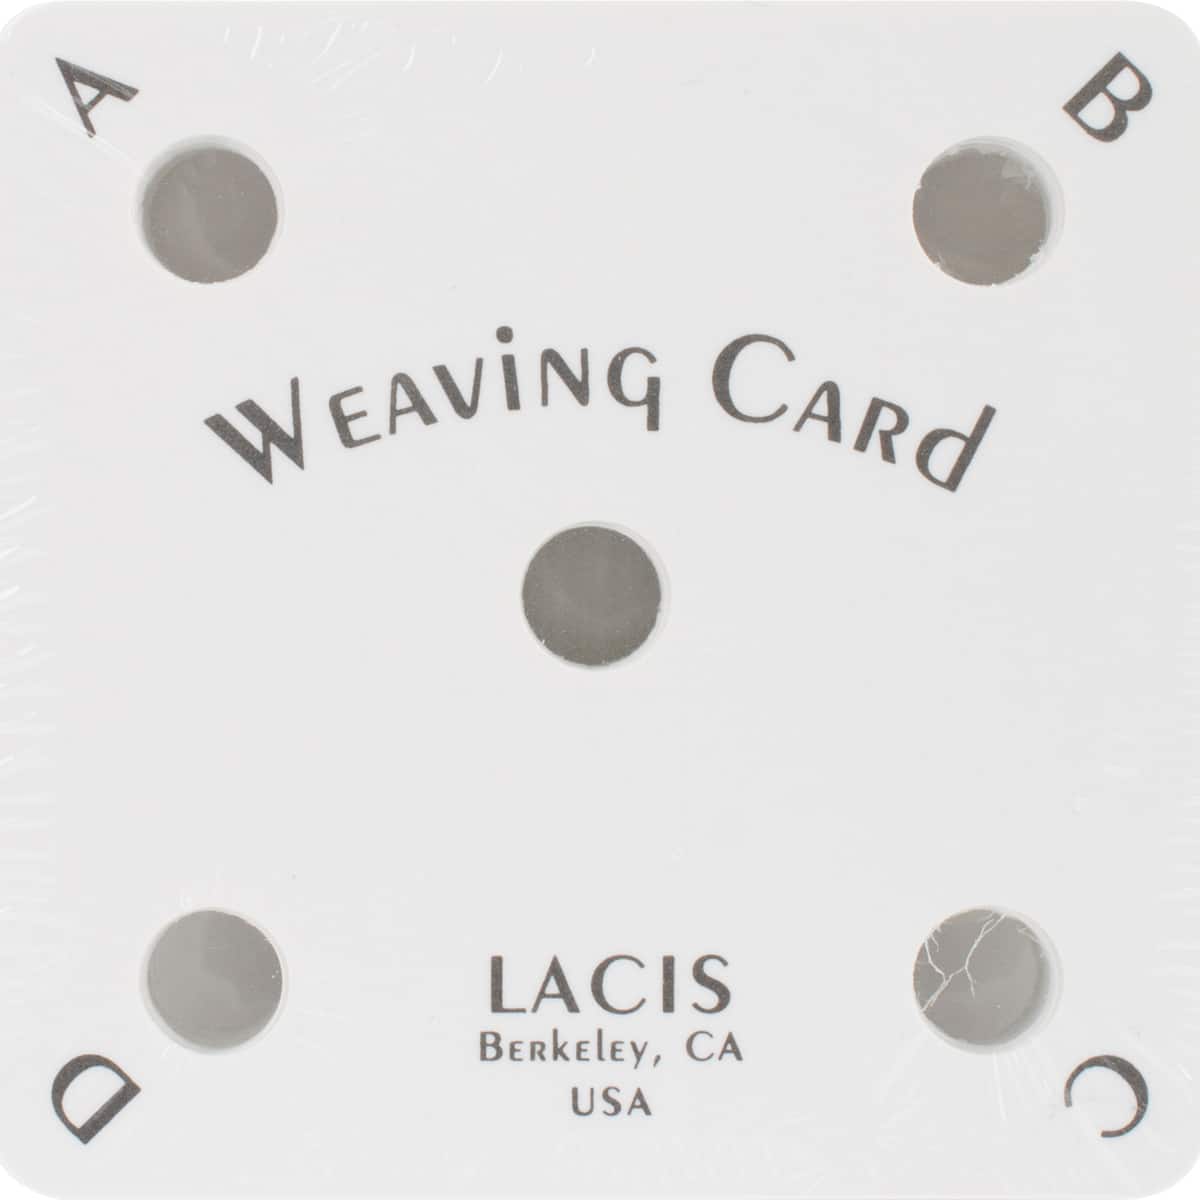 Lacis Weaving Cards, 25ct.